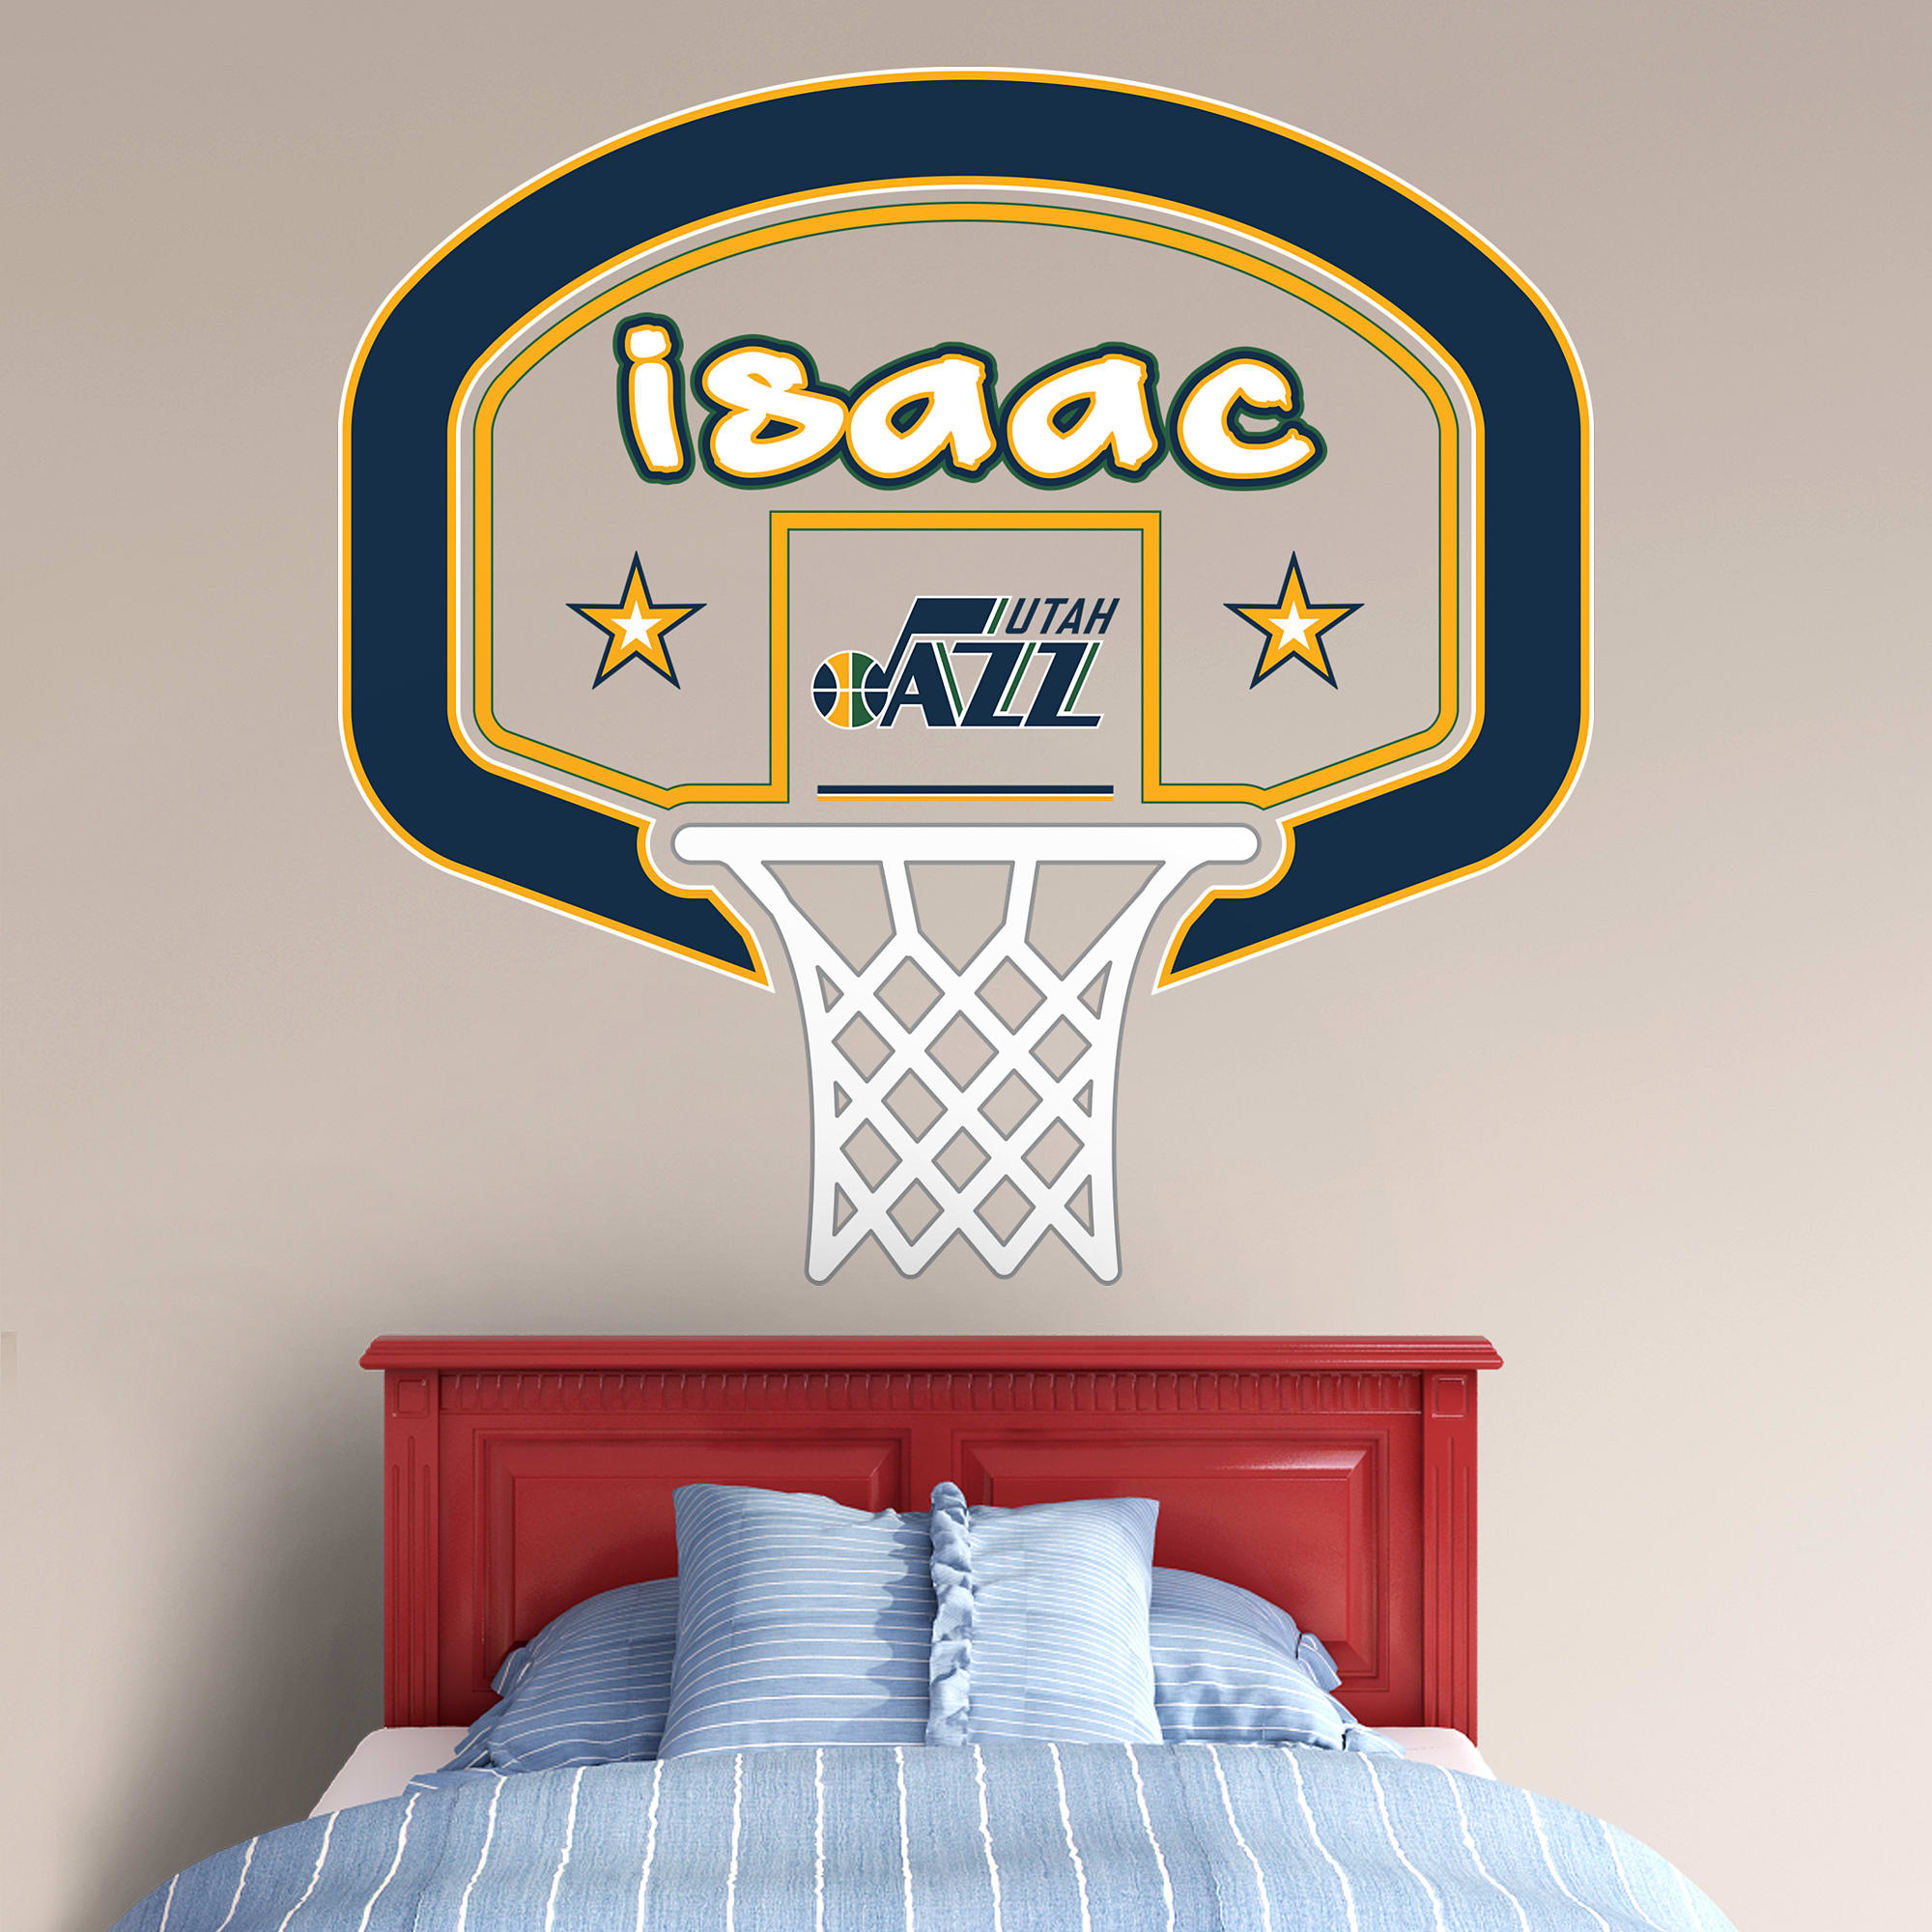 Utah Jazz: Personalized Name - Officially Licensed NBA Transfer Decal 39.5"W x 52.0"H by Fathead | Vinyl